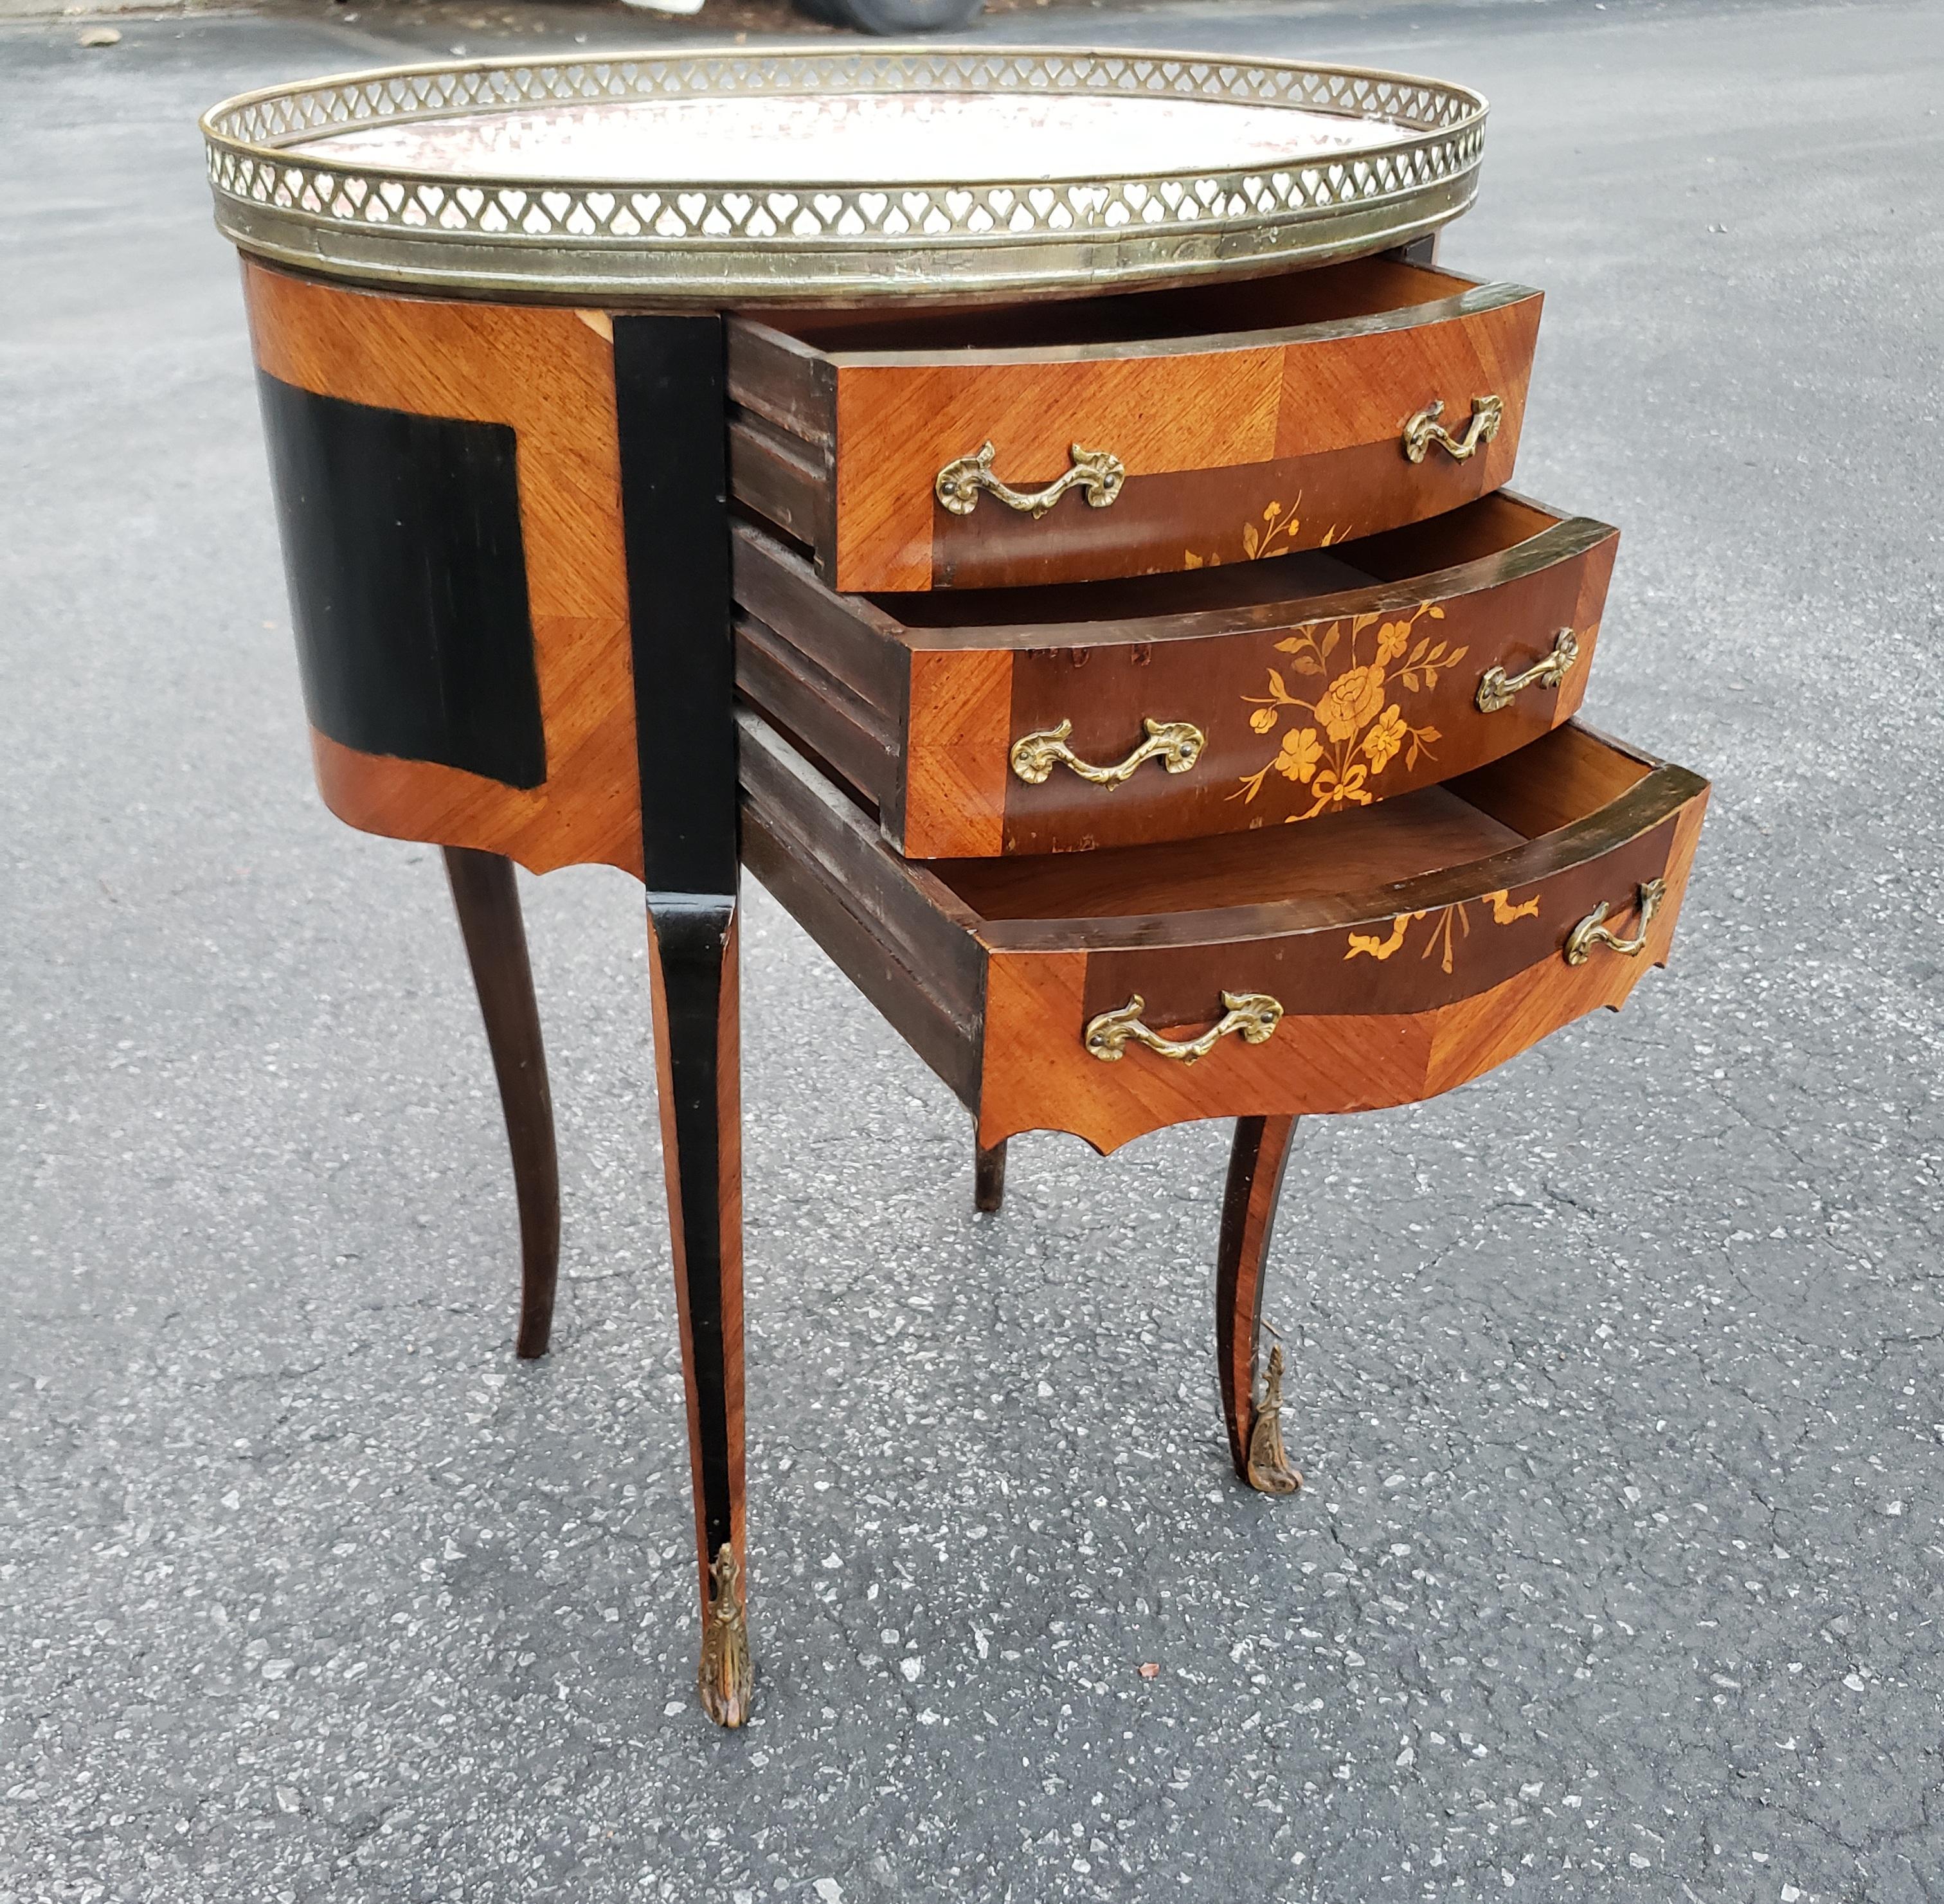 Louis XV Ebonized Satinwood Inlaid Mahogany And Marble Inset Side Table In Good Condition For Sale In Germantown, MD